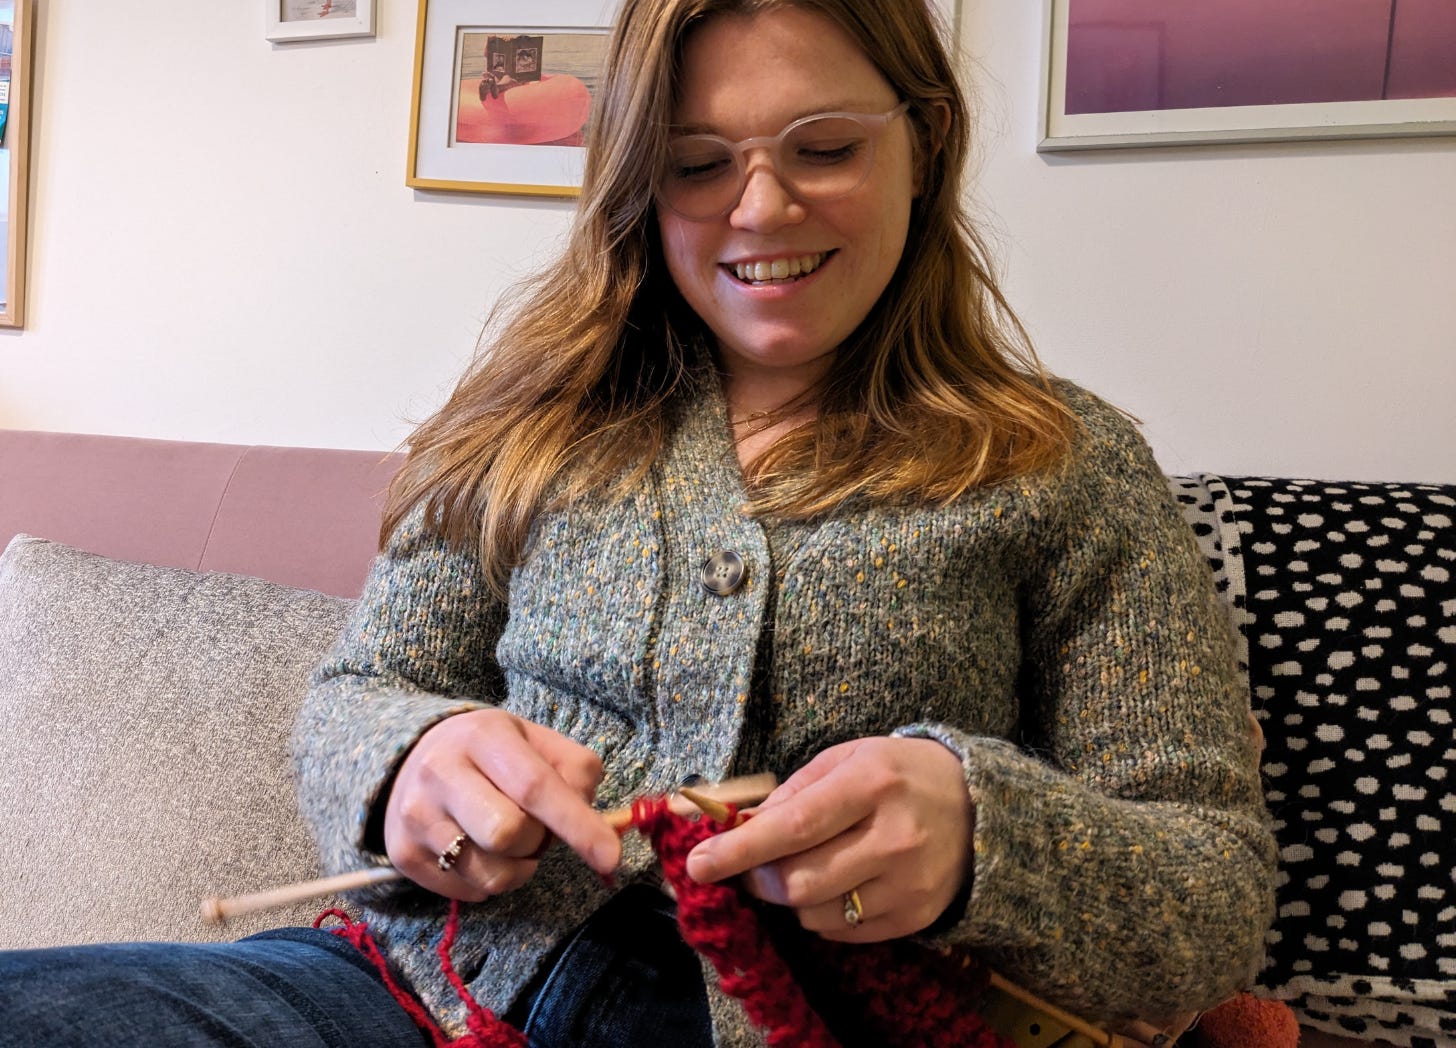 Libby Page sits on a sofa, wearing a grey jumper, knitting with red wool. She is smiling and looking down at her knitting. 